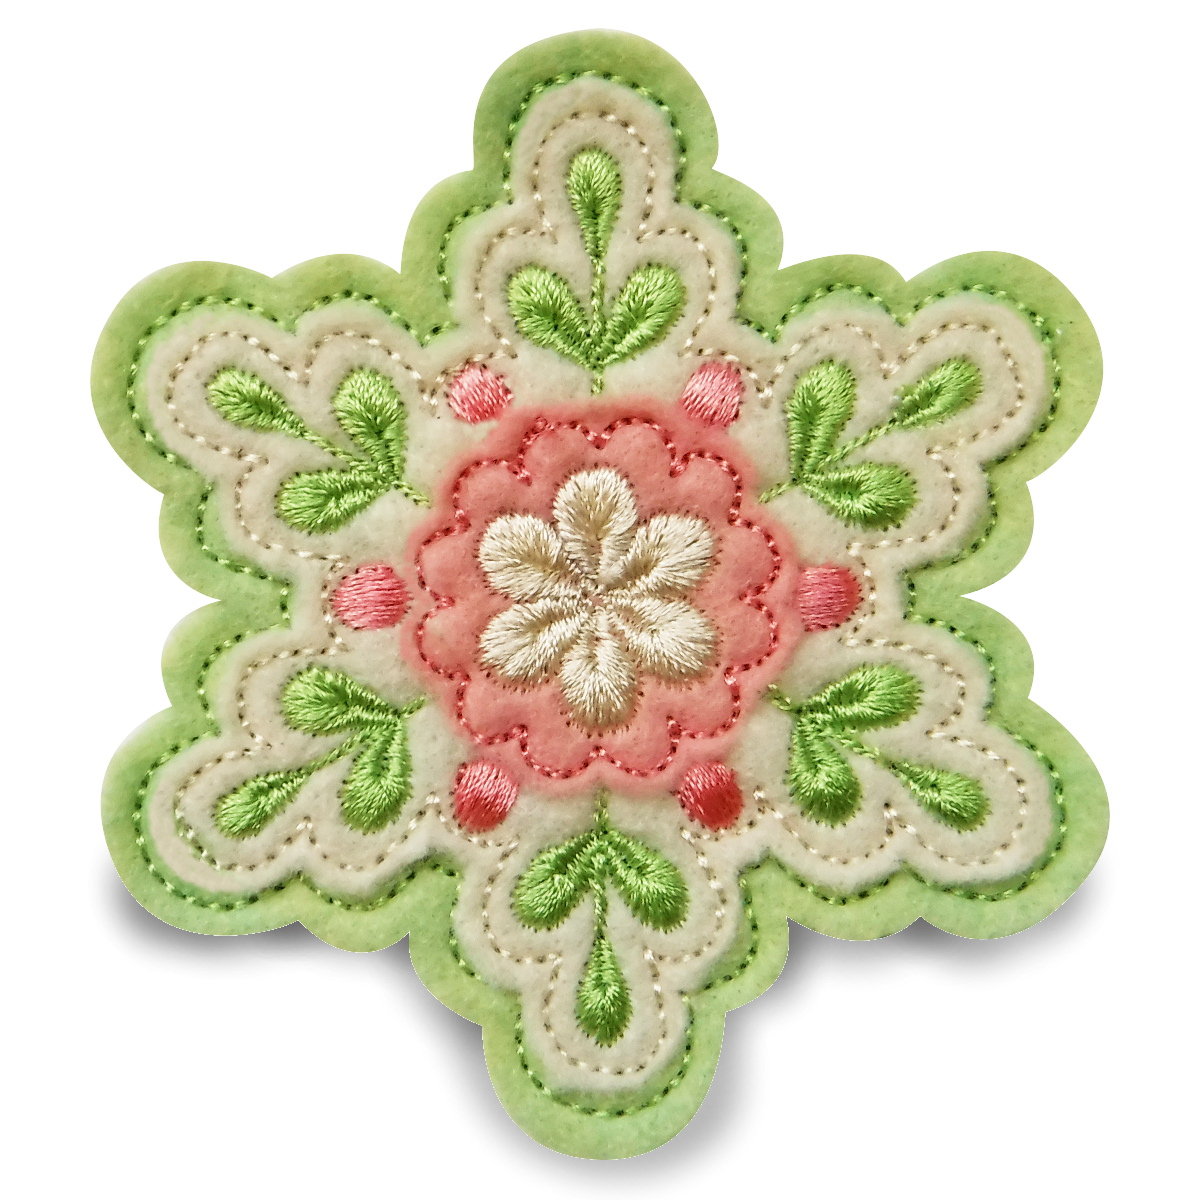 Felt Embroidery Patterns Christmas Designs For Machine Embroidery